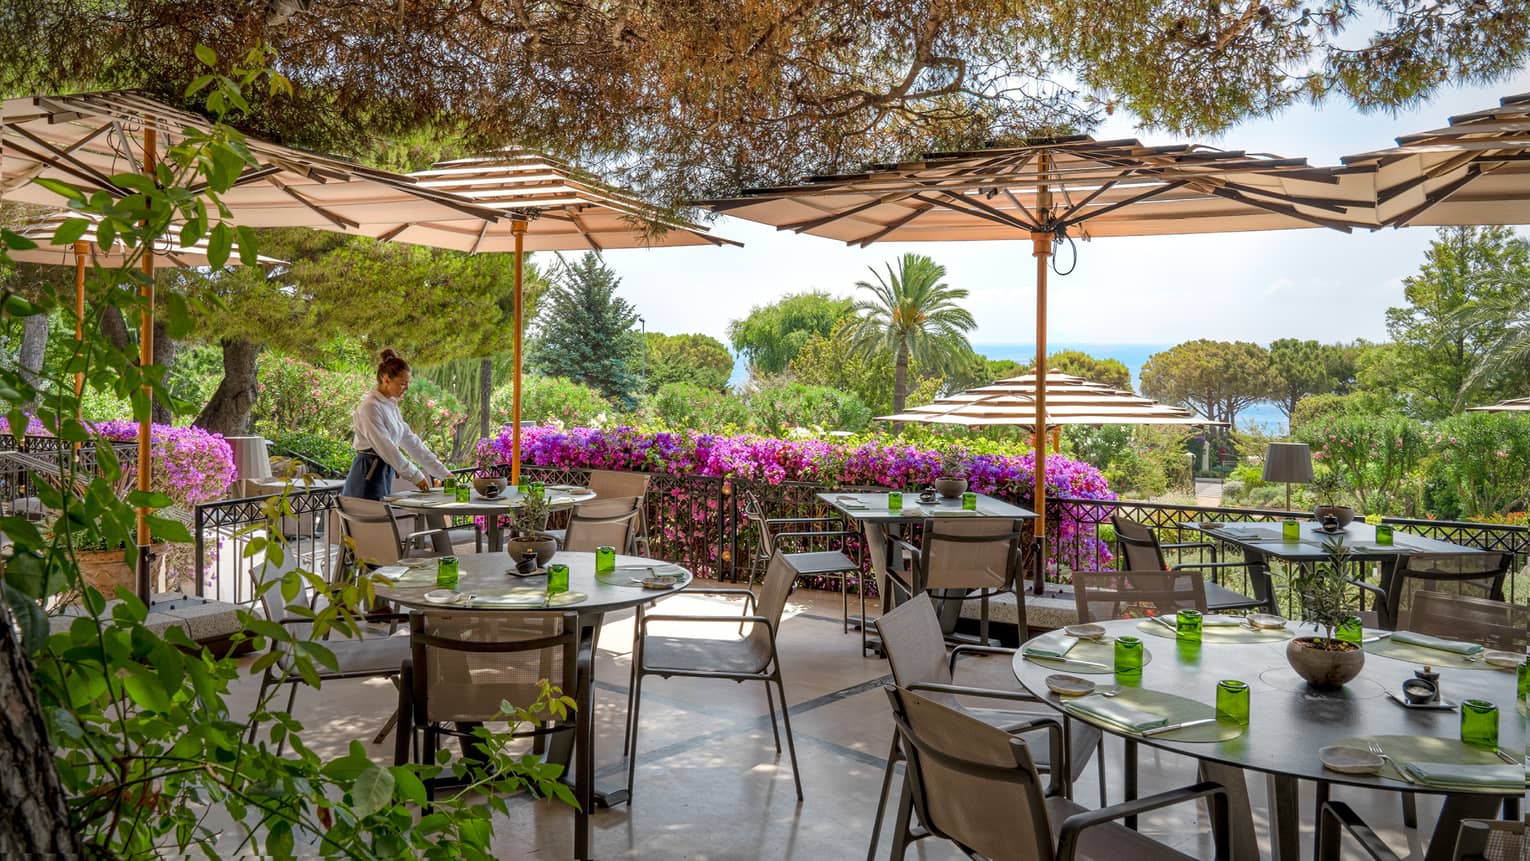 Waiter sets a table on outdoor restaurant terrace, surrounded by greenery and magenta-coloured flowers